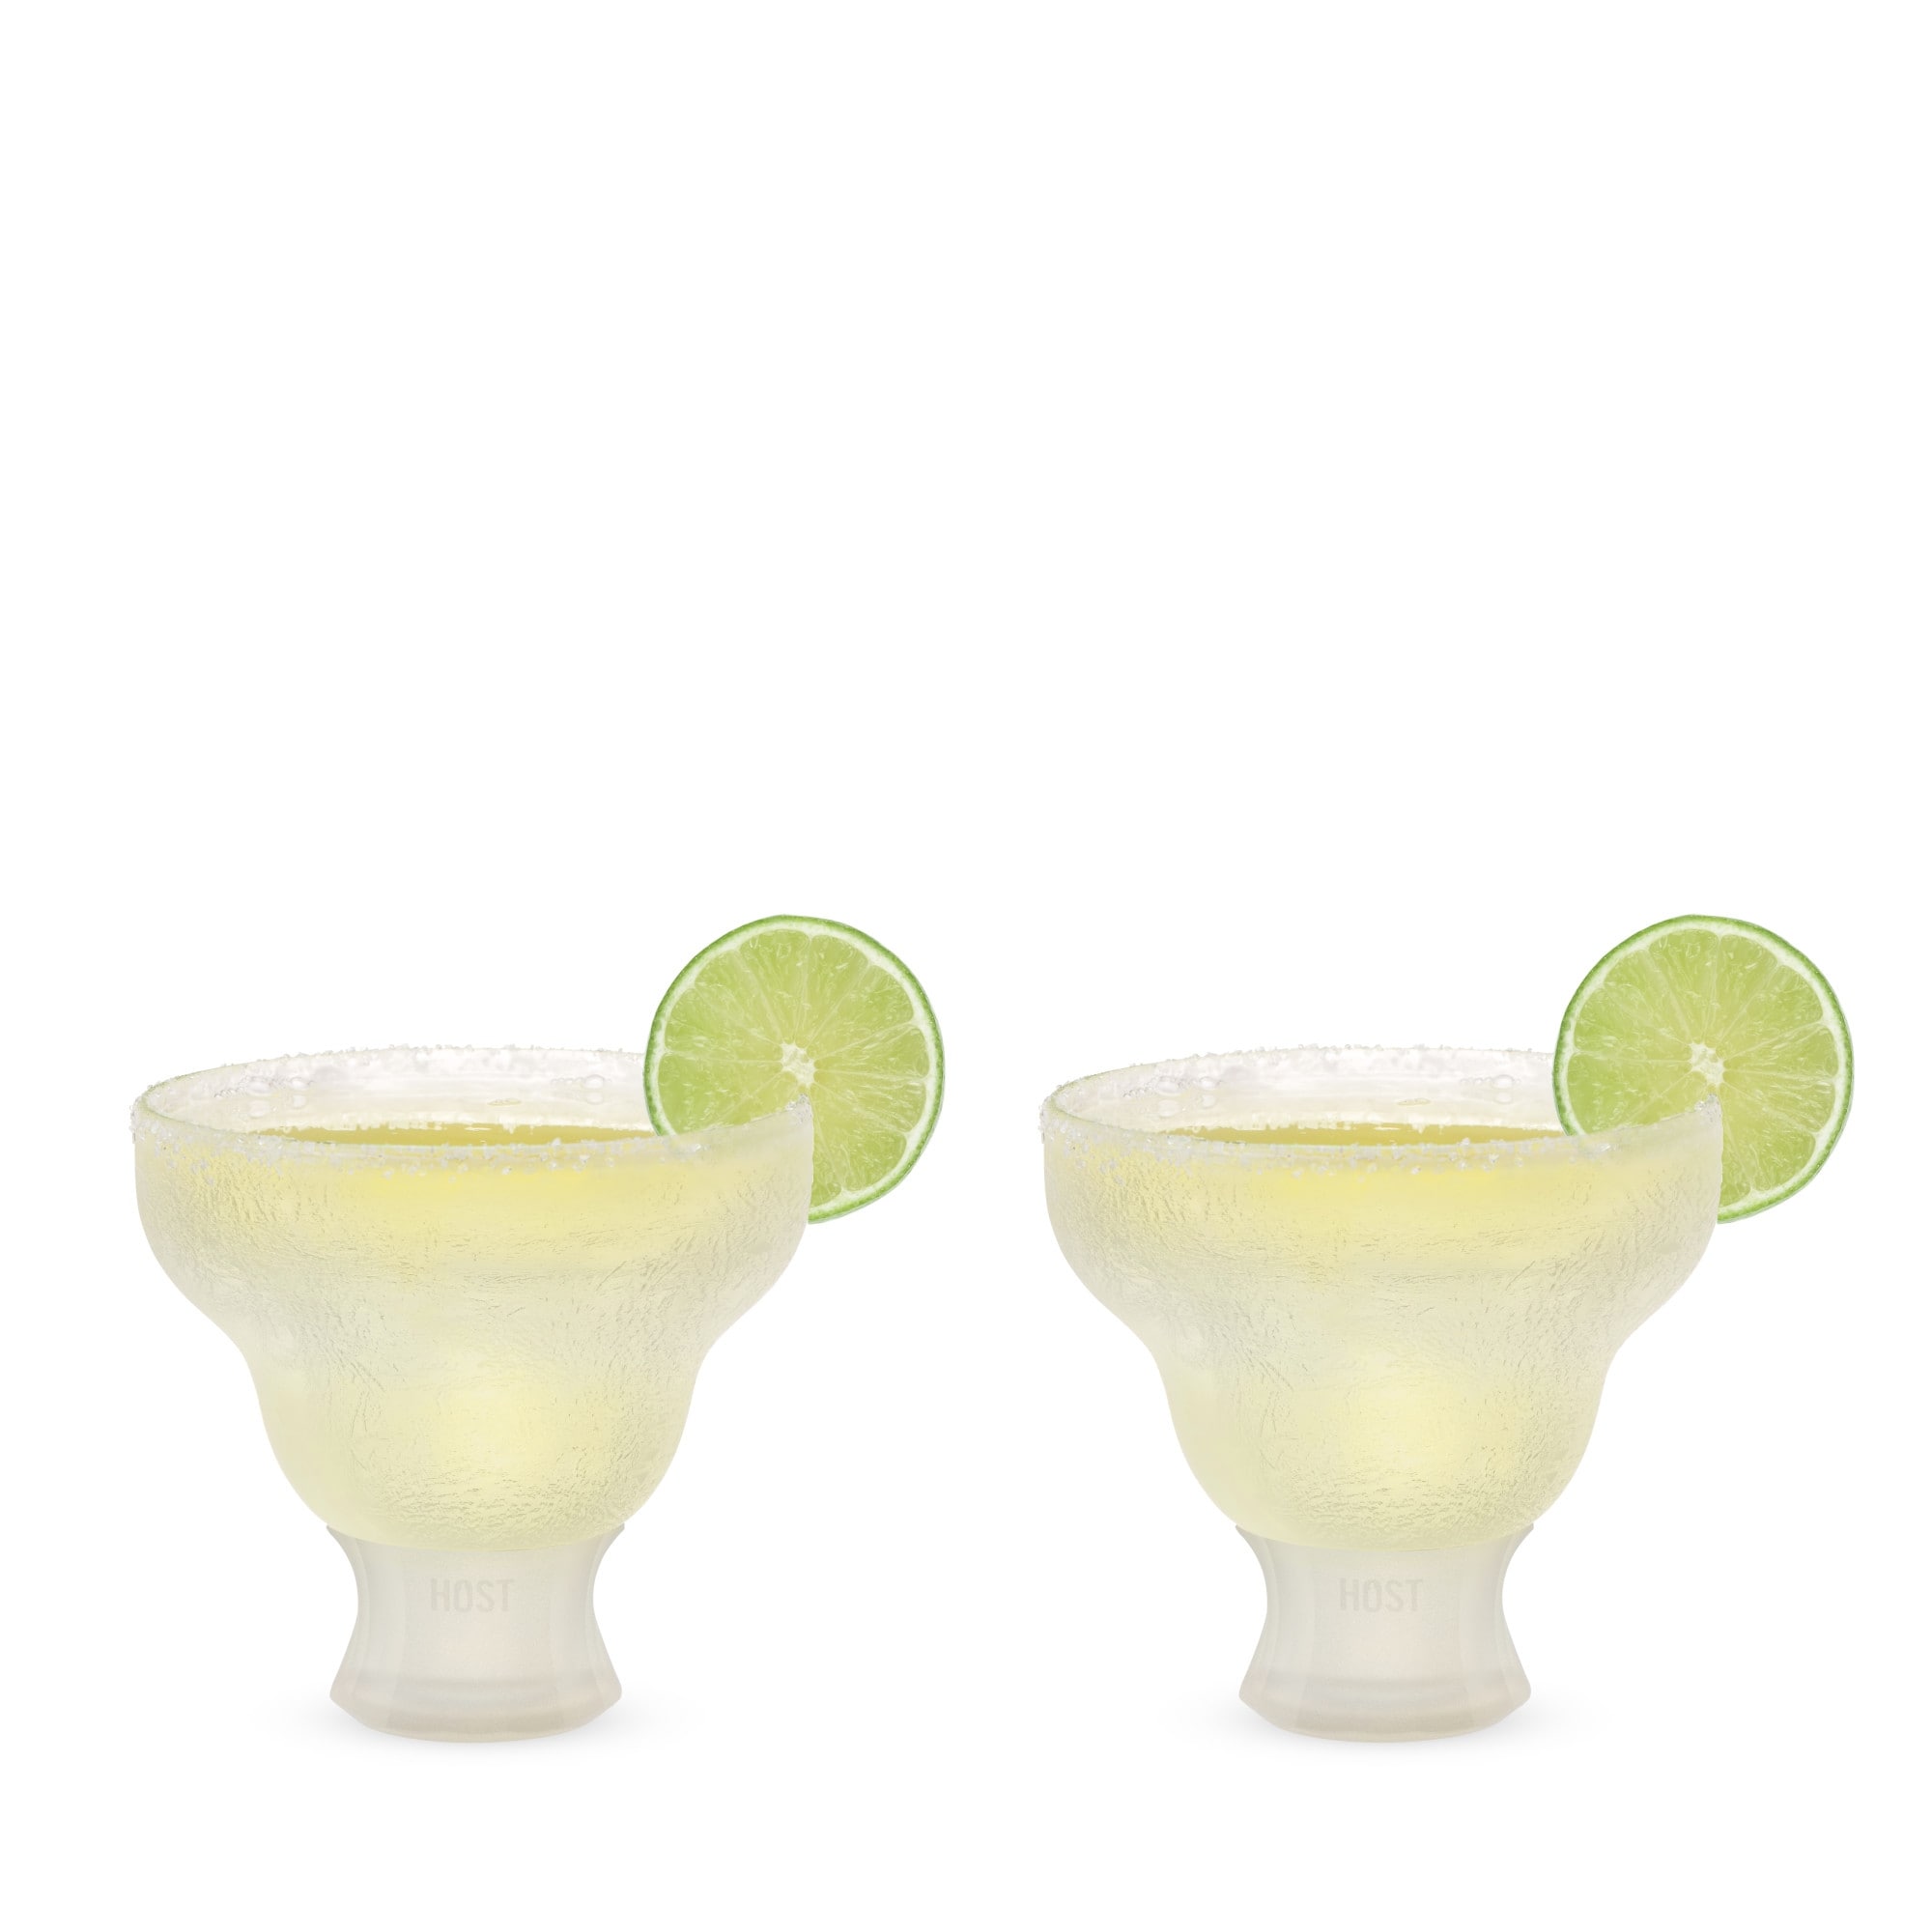 https://ak1.ostkcdn.com/images/products/is/images/direct/bf417328c2c82c587fe91820cd618b8b64e20977/Glass-FREEZE-Margarita-Glass-%28set-of-two%29-by-HOST.jpg